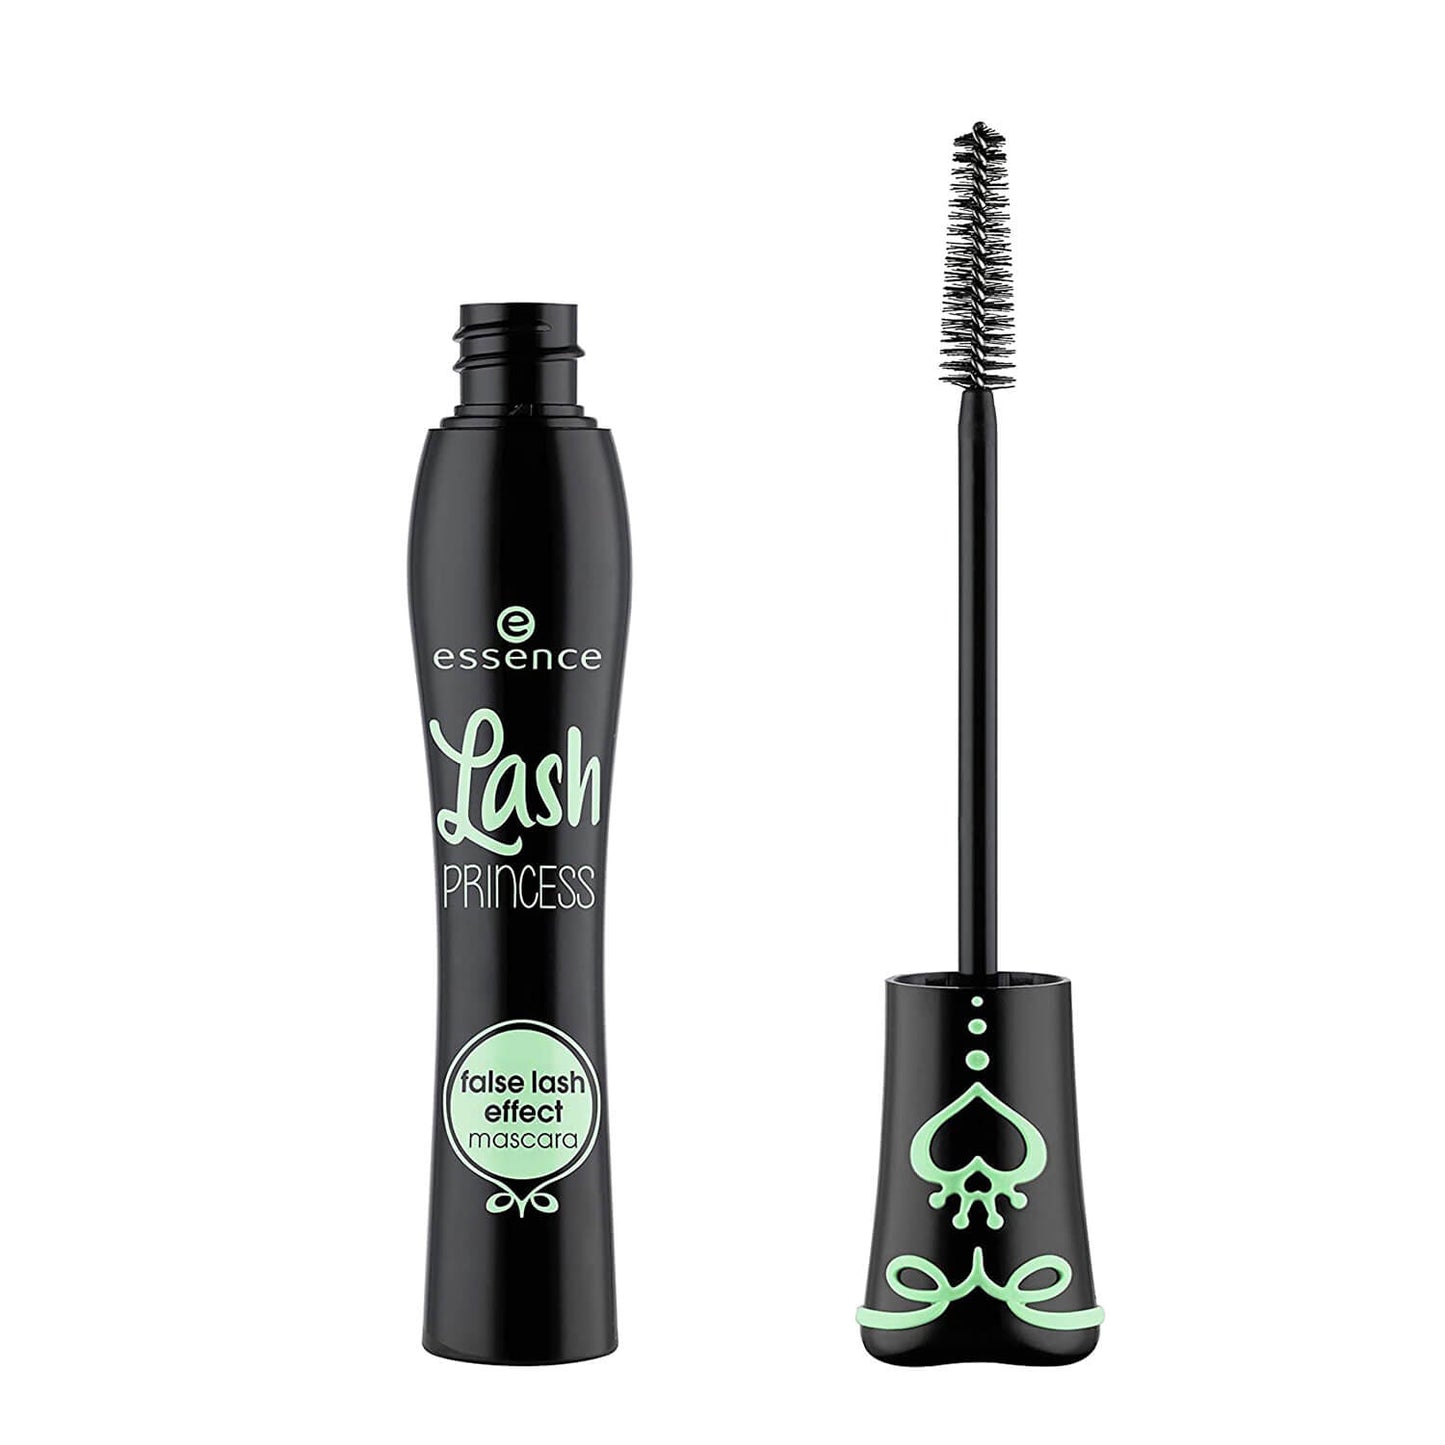 essence false lash effect mascara available at heygirl.pk for delivery in Pakistan